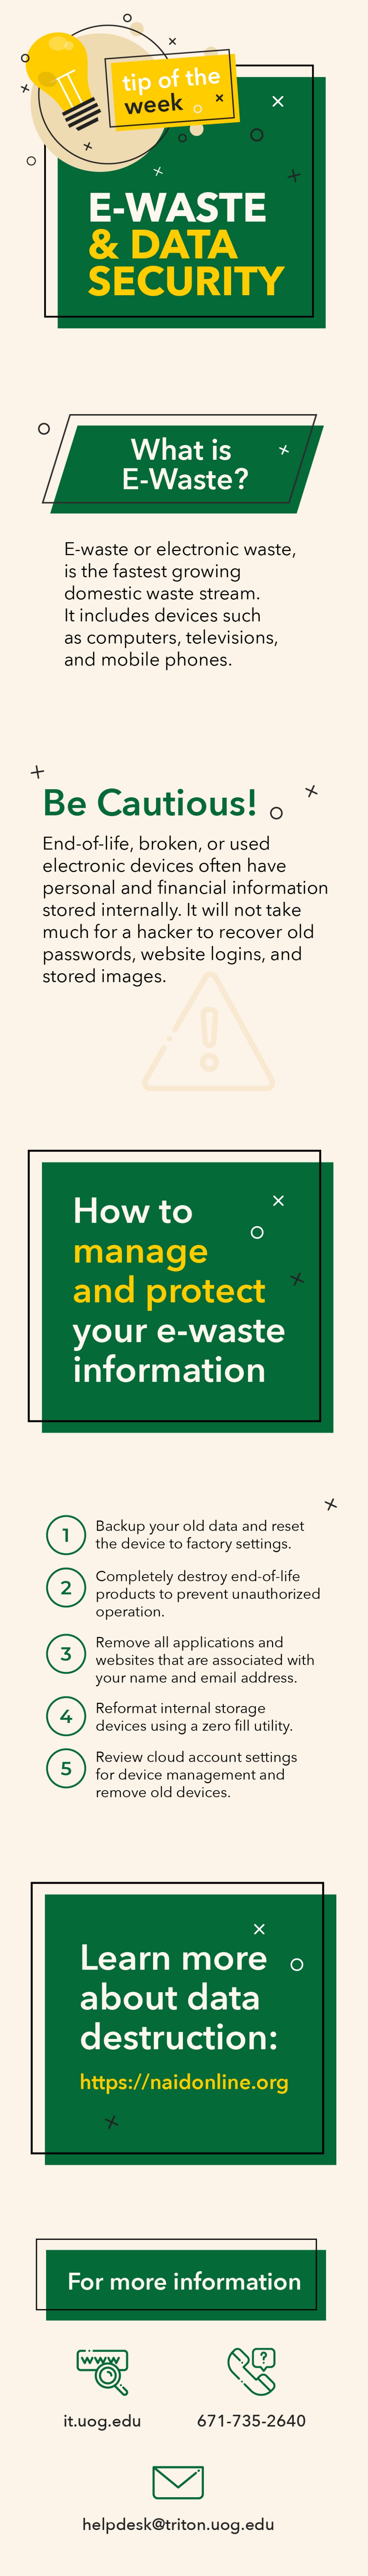 Inforgraph about E-waste